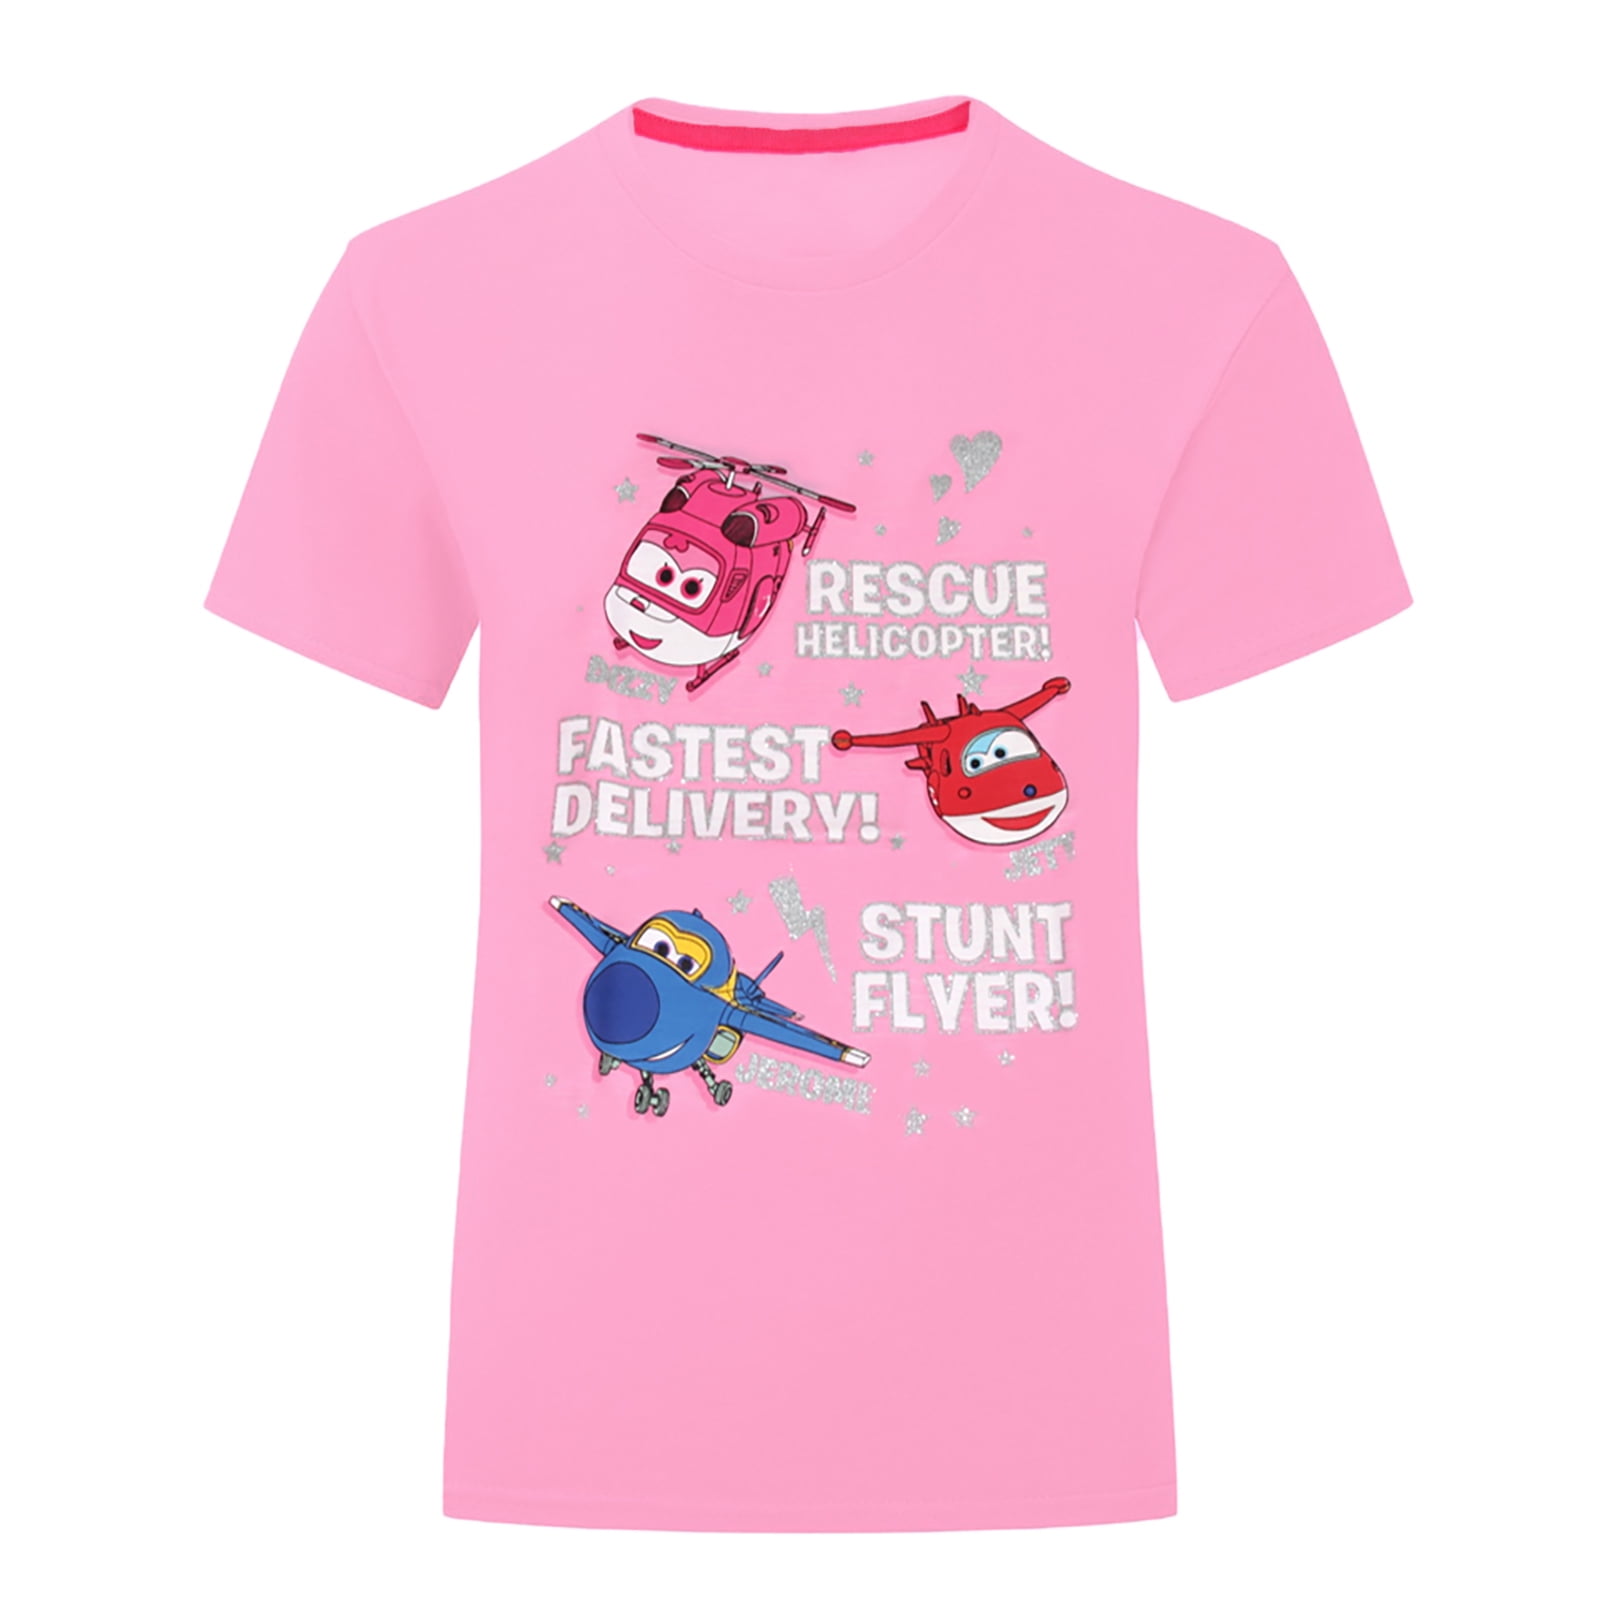 LOL Characters Girls Long Sleeve Top T-Shirt with Glitter Effect for Girls 4-10 Years 